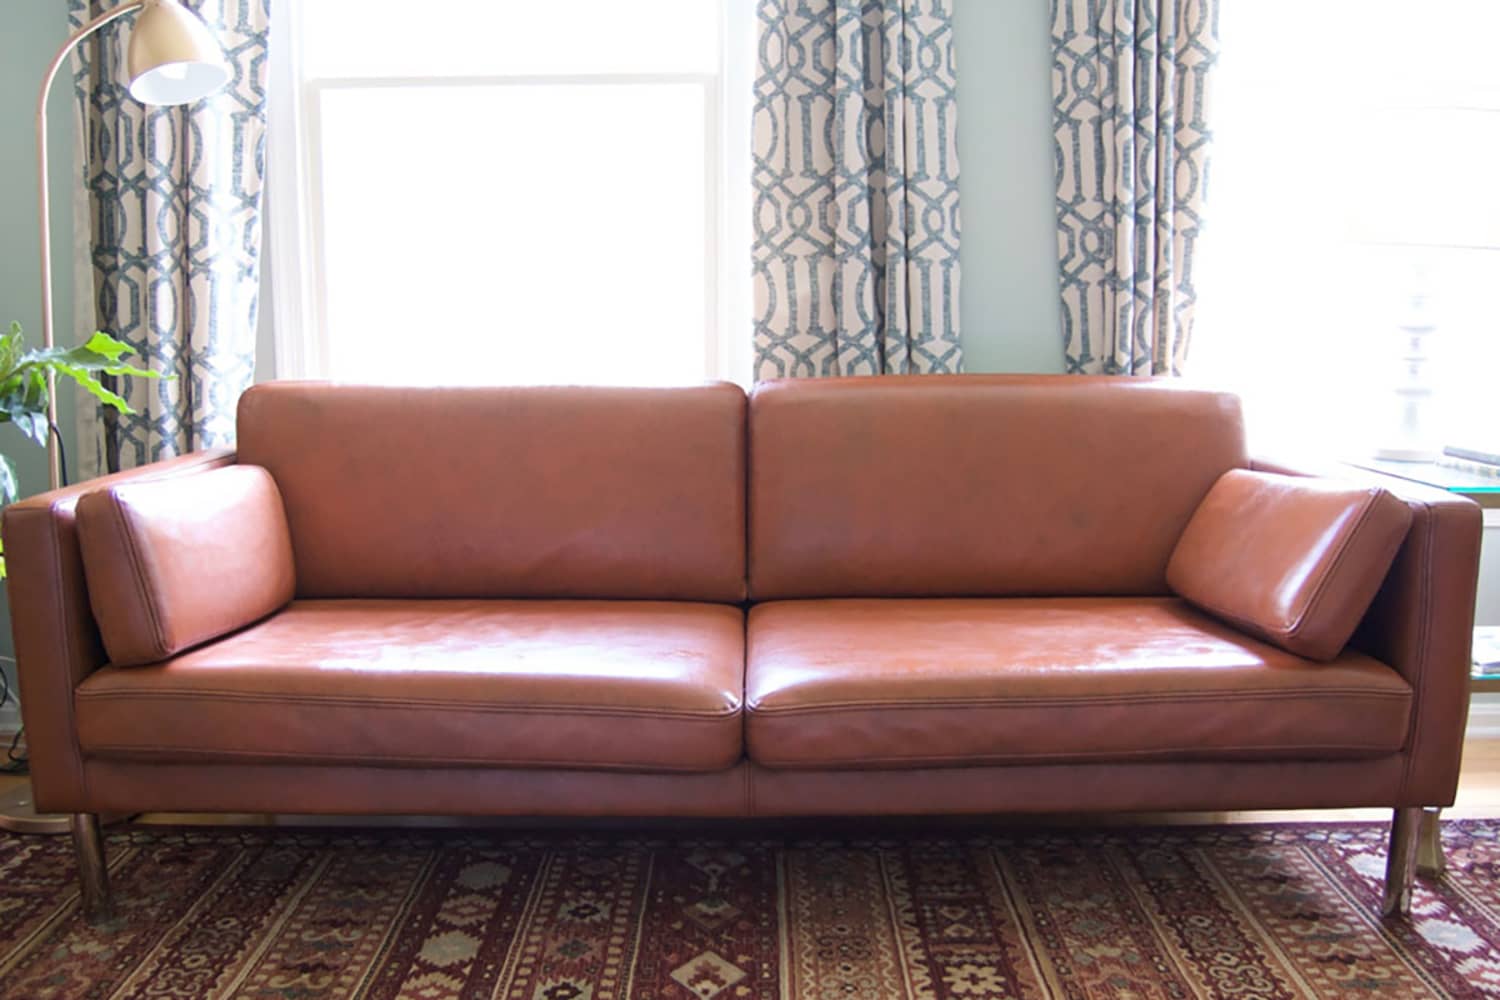 How to Repair a Leather Couch QUICK & EASY with Leather Furniture Paint 